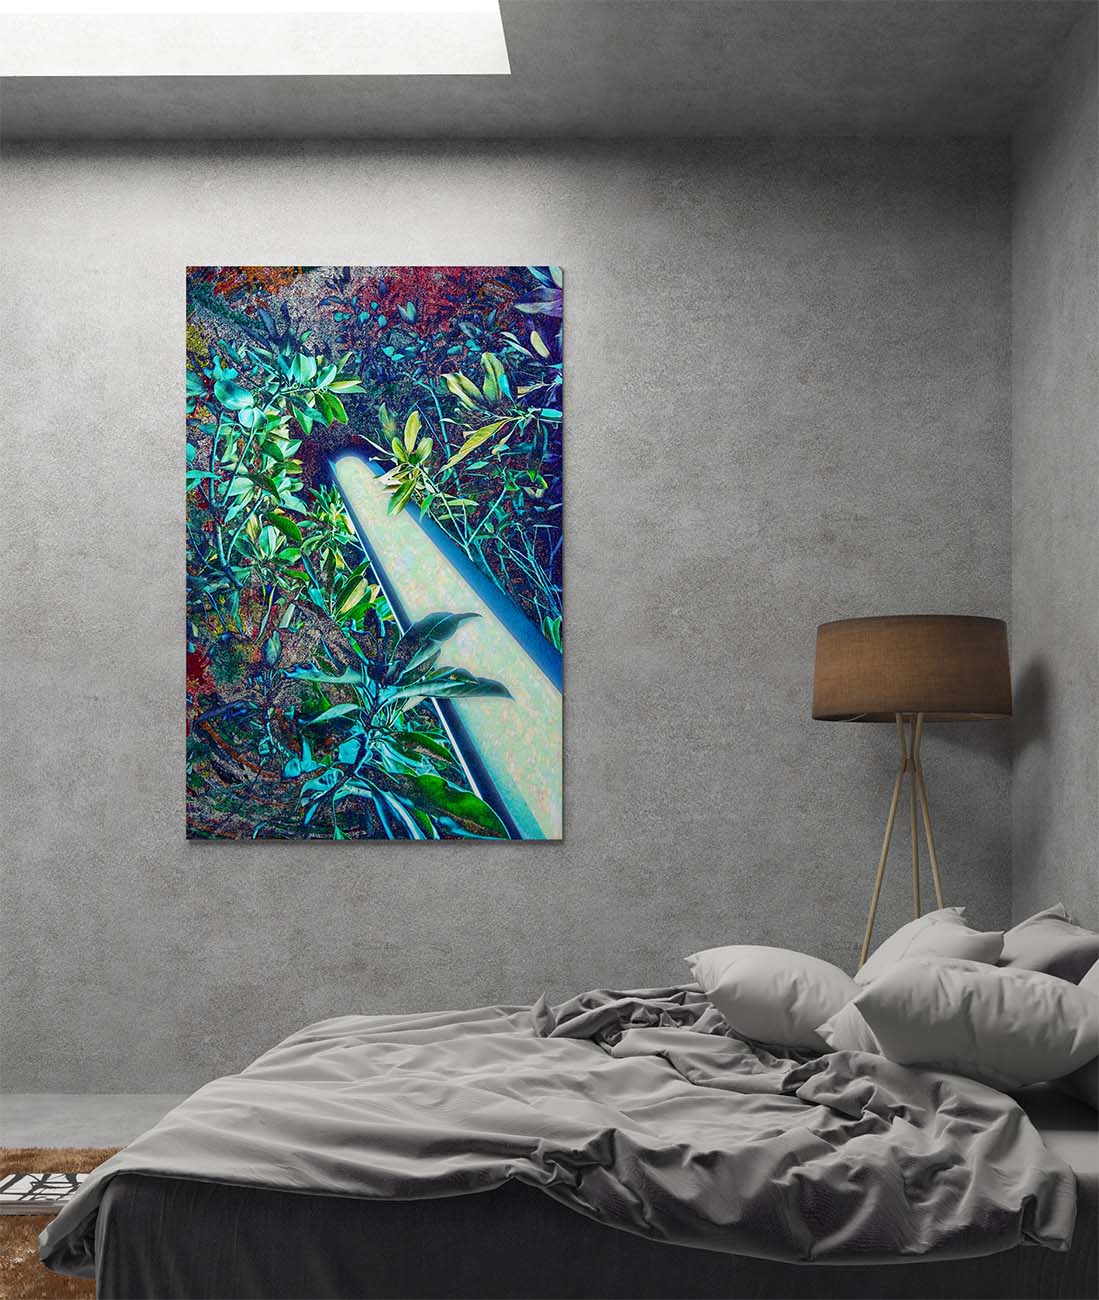 Lucid Light abstract art by Doug LaRue on a bedroom wall